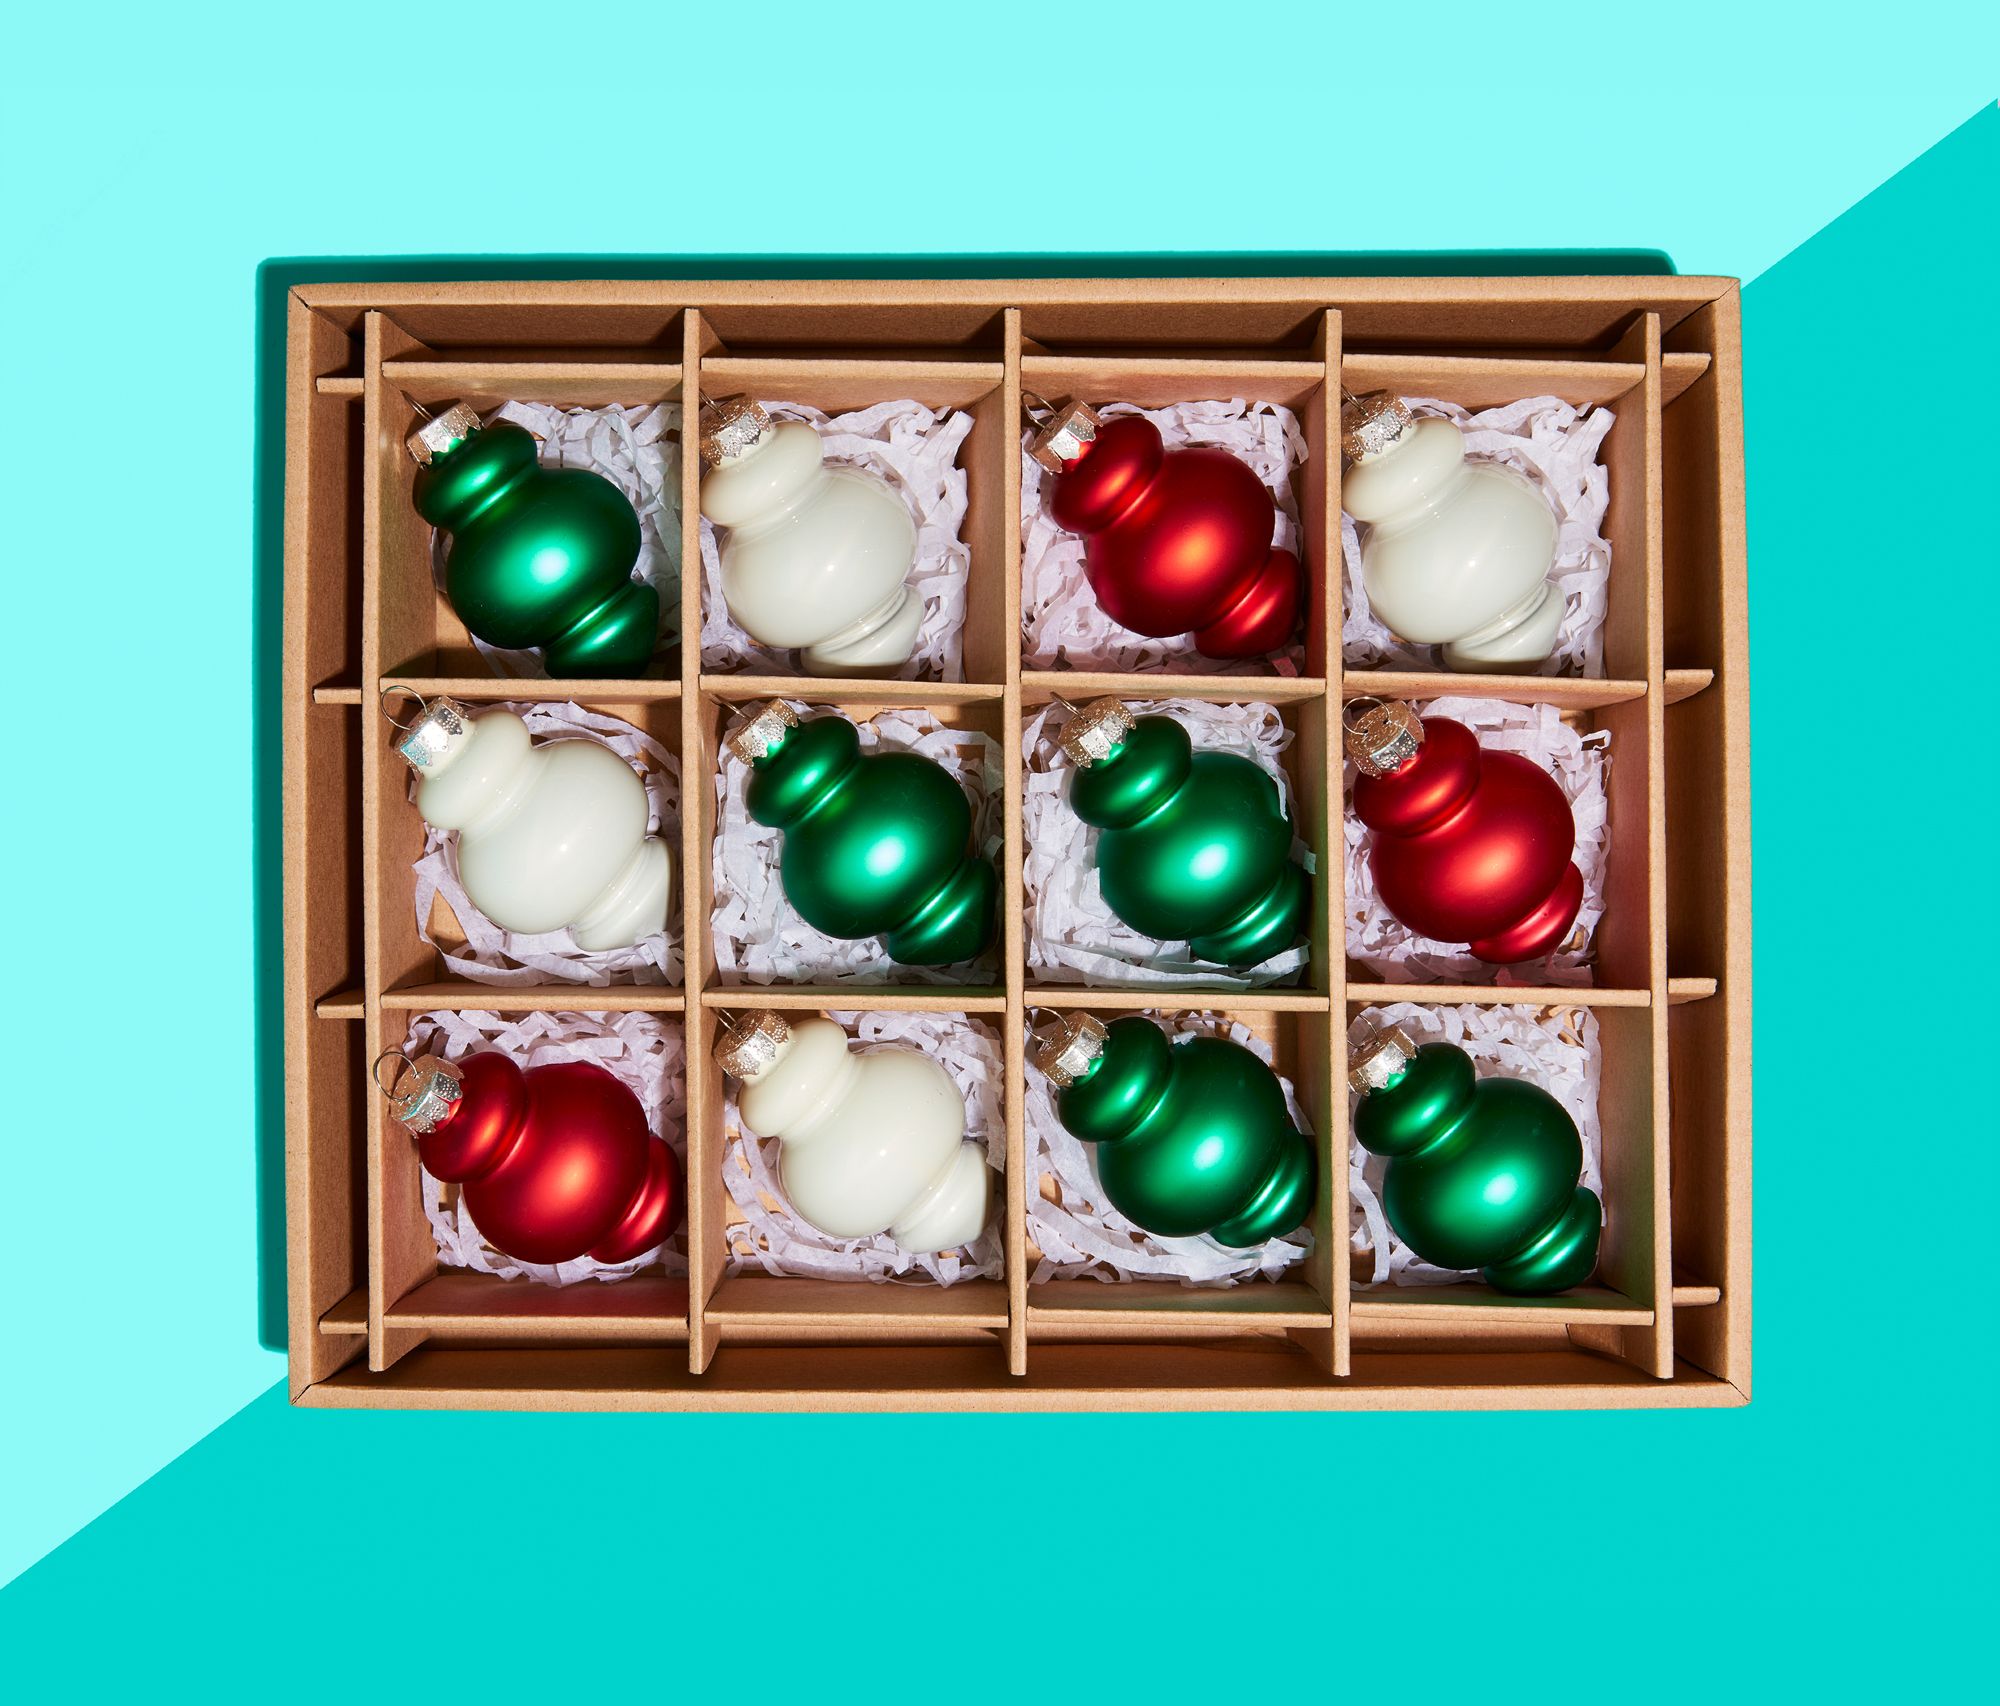 Designed for Delicate Christmas Decorations & Baubles Tear Proof Non-Woven Fits Under Bed Premium Christmas Bauble Storage Box With Dividers 64 Compartment Xmas Ornament Storage Container 